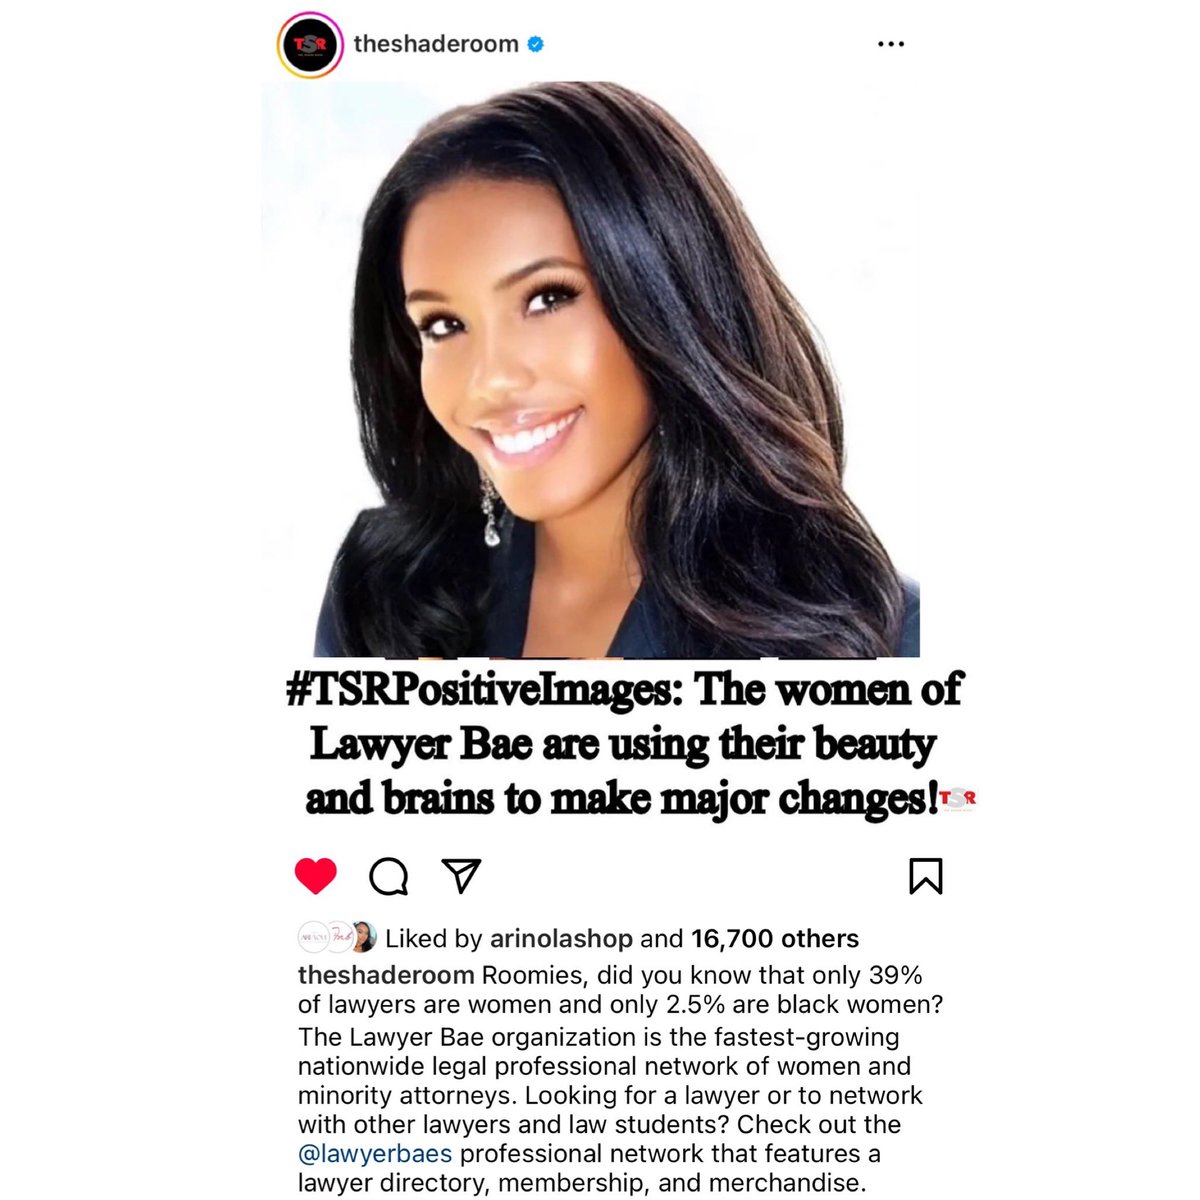 Pic of the Day 📸 : Happy birthday to our host @iamjcarter 🎂and thank you @TheShadeRoom for the April feature honoring her legal work!👏🏽⚖️ #blacklawyers #lawtwitter #blacklawtwitter #lawyers